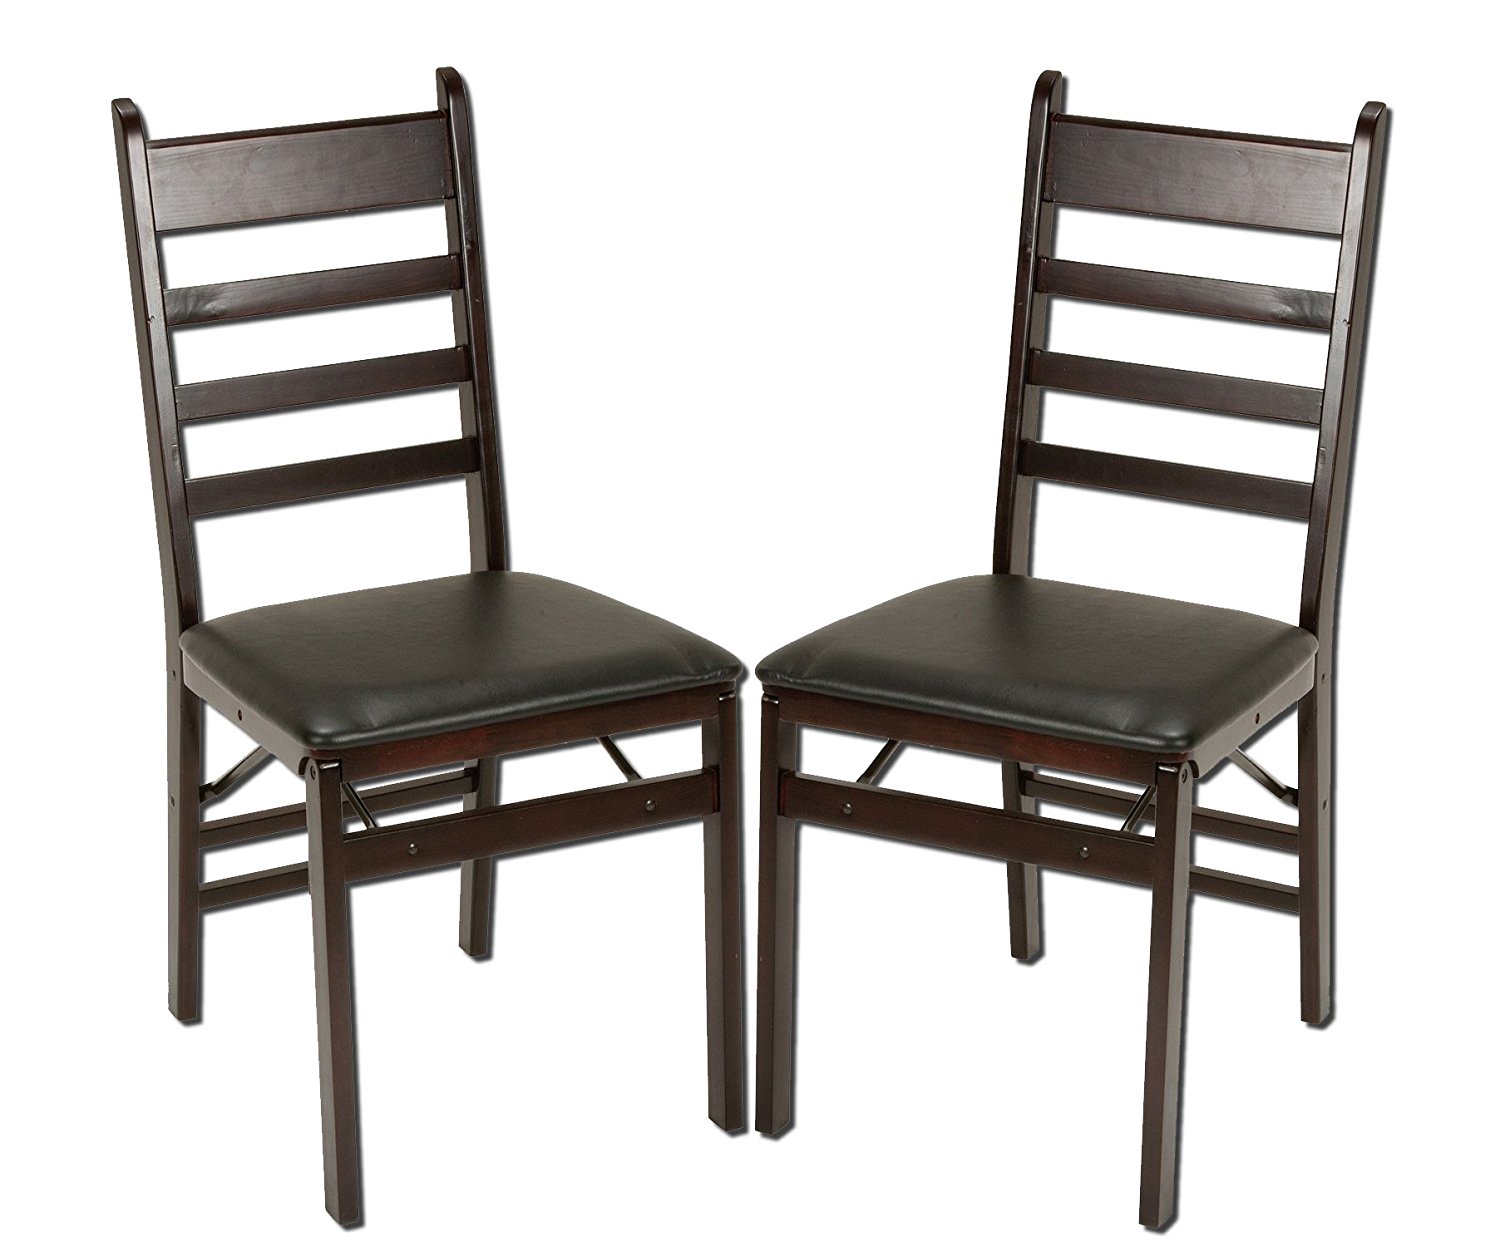 Cosco 2-Pack Wood Folding Chair with Vinyl Seat and Ladder Back, Espresso